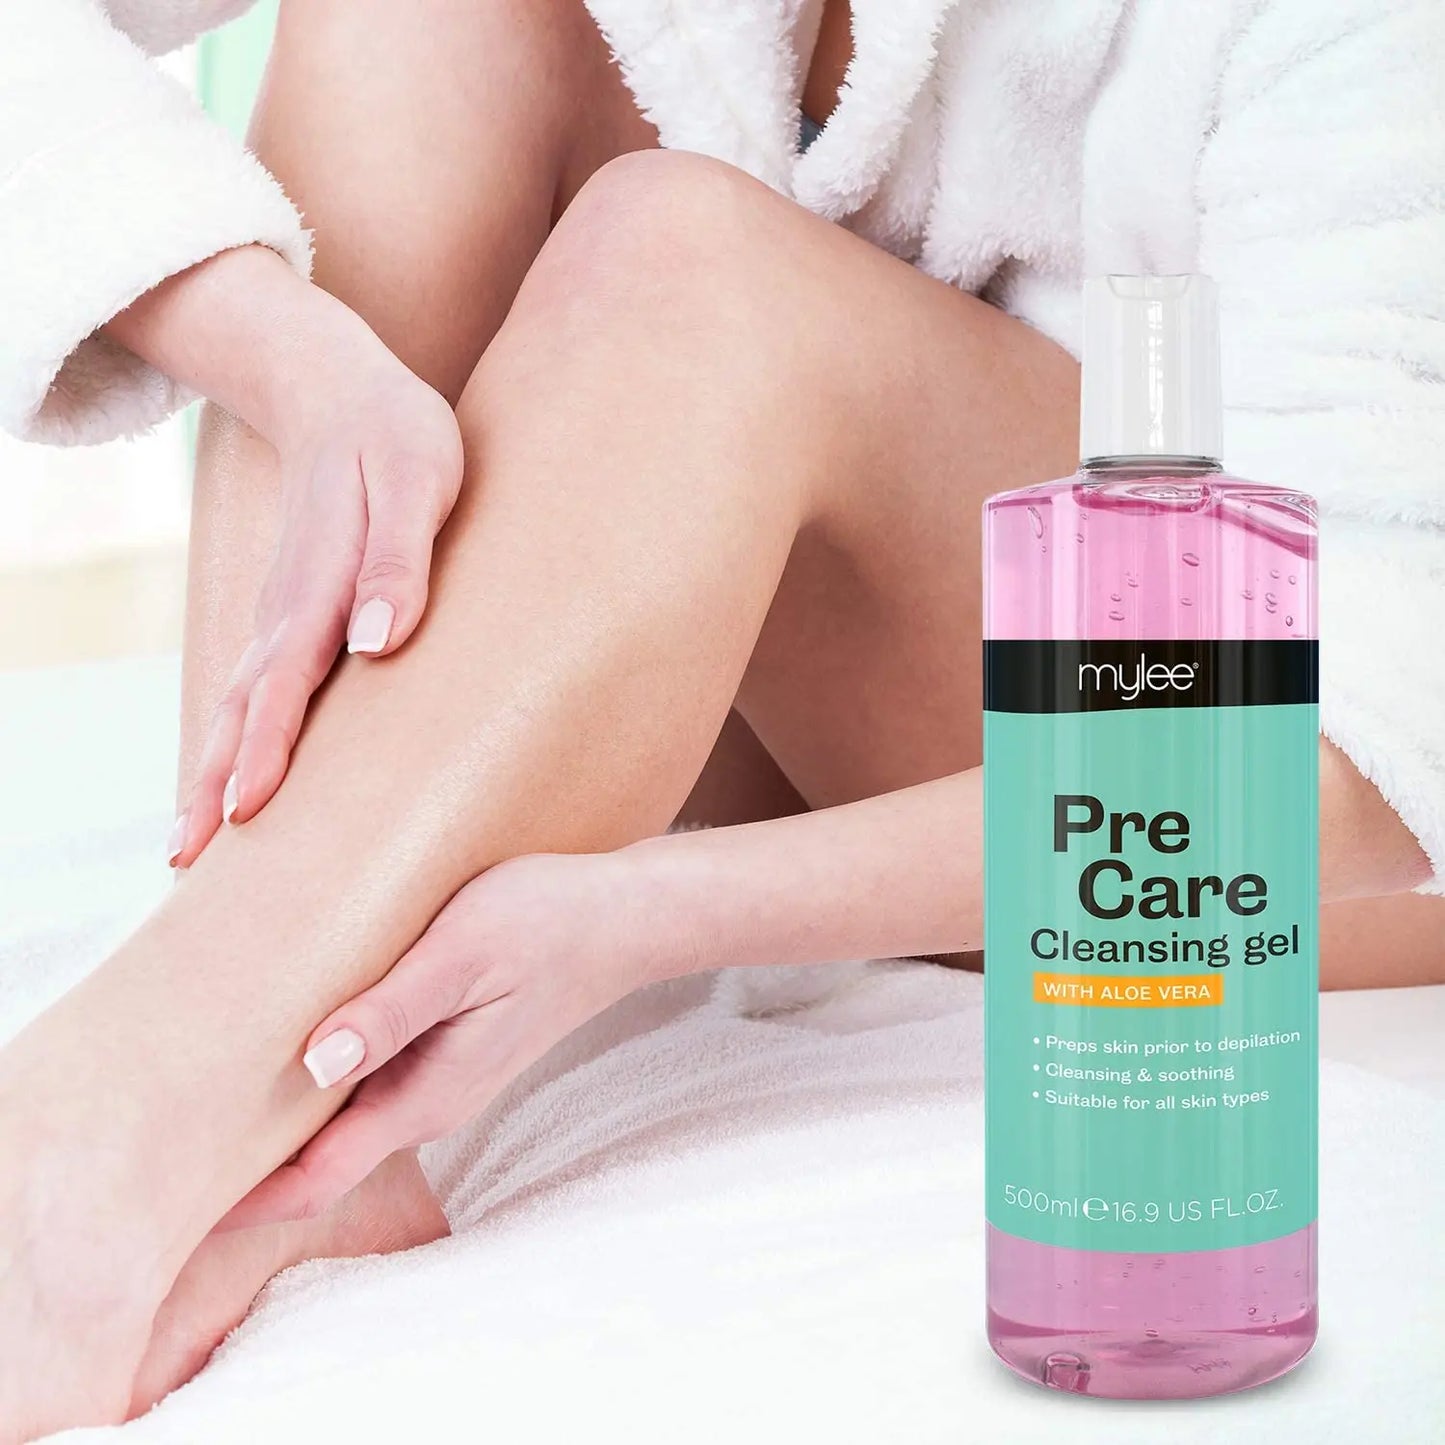 Pre Care Lotion for Cooling and Cleansing Skin Before Wax - NZAZU